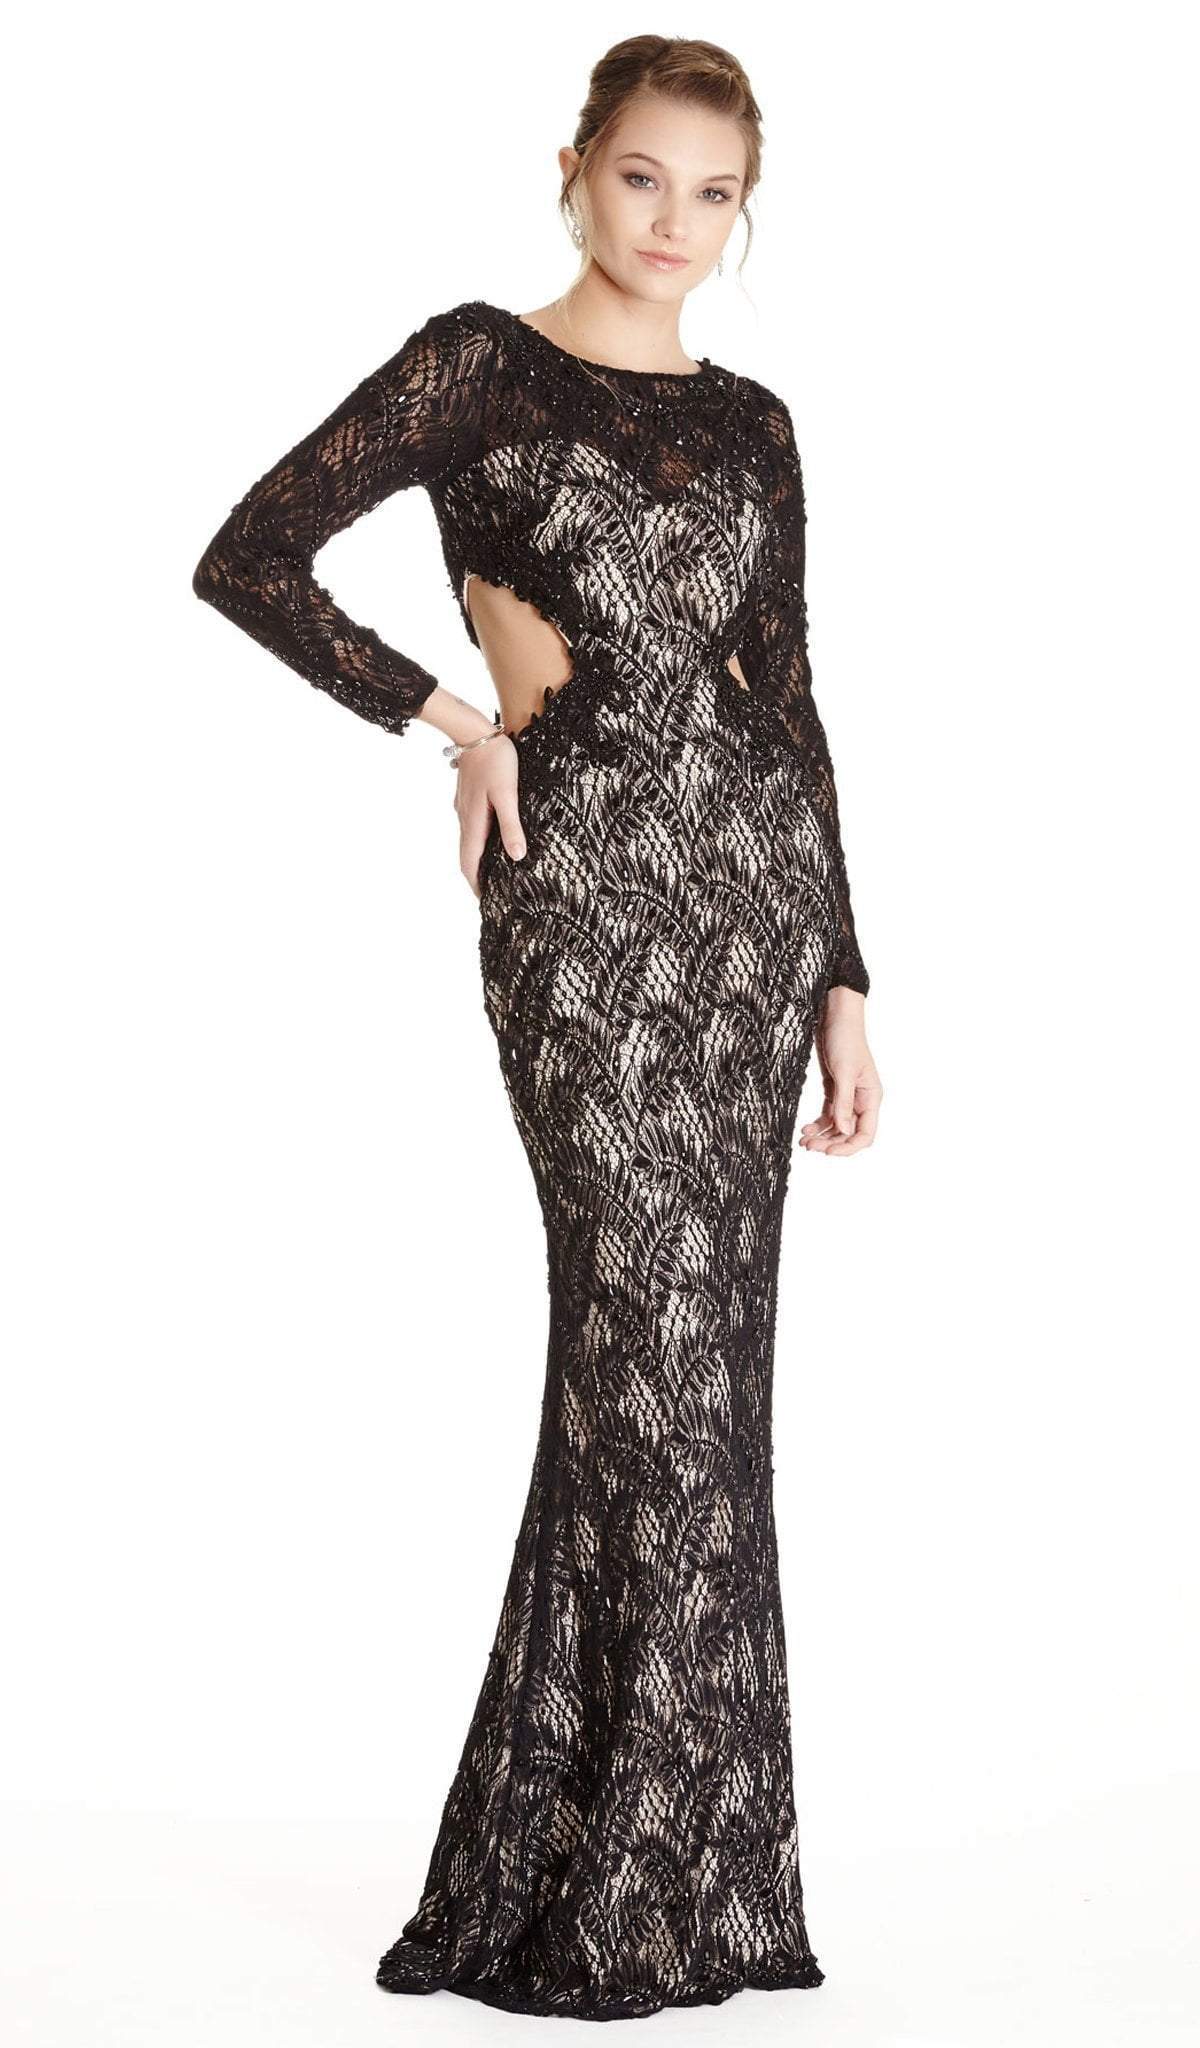 Image of Aspeed Design - Bedazzled Long Sleeve Evening Dress